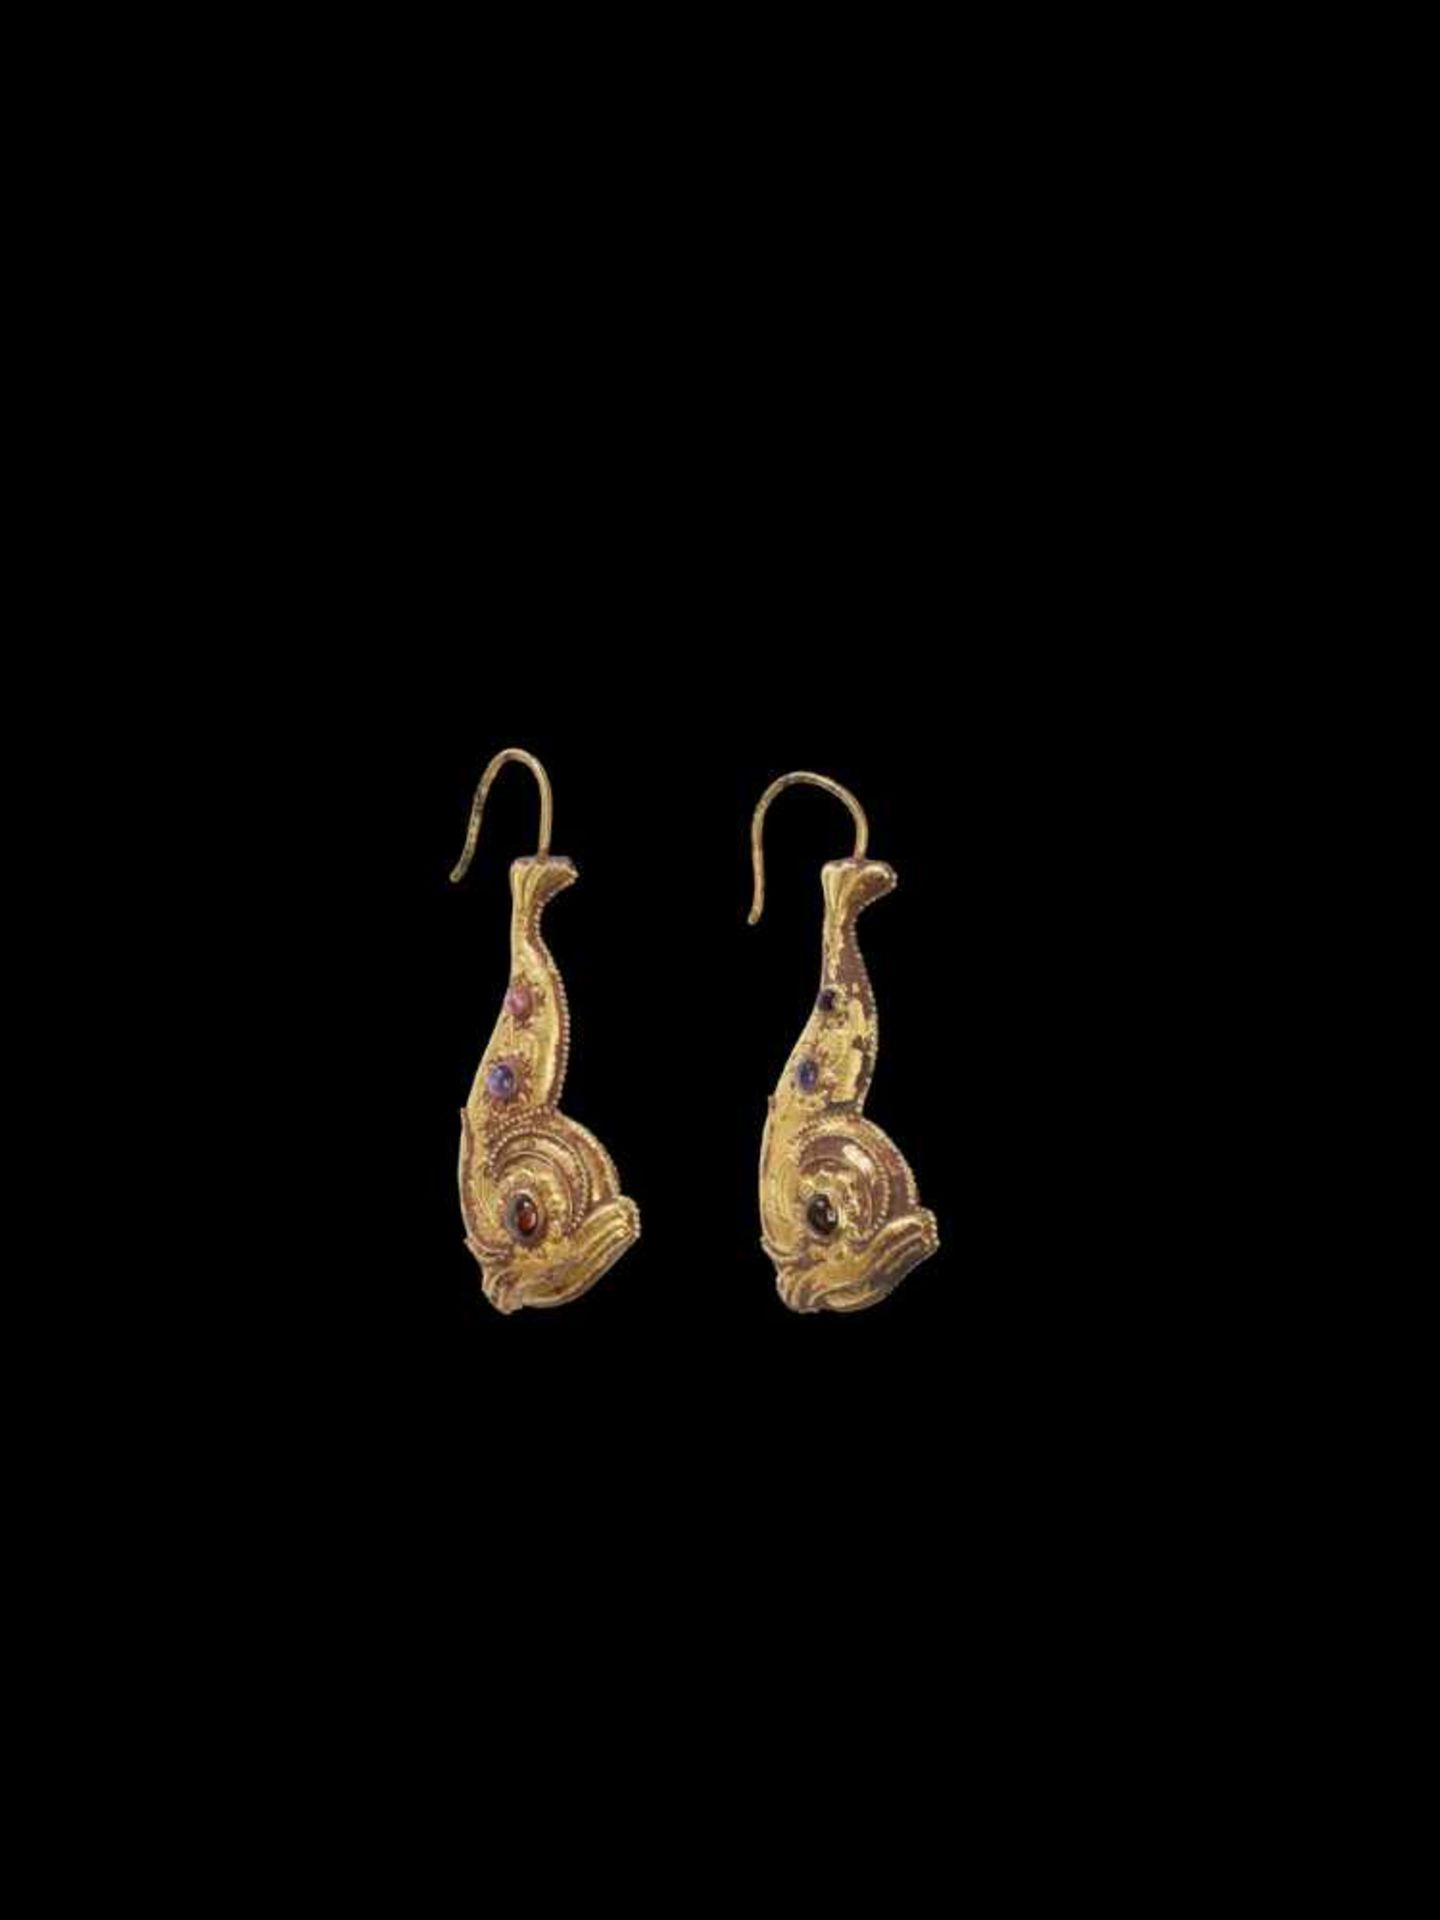 A PAIR OF CHAM REPOUSSÉ GOLD EAR ORNAMENTS Champa, c. 10th century. The earrings crafted in the form - Image 5 of 6